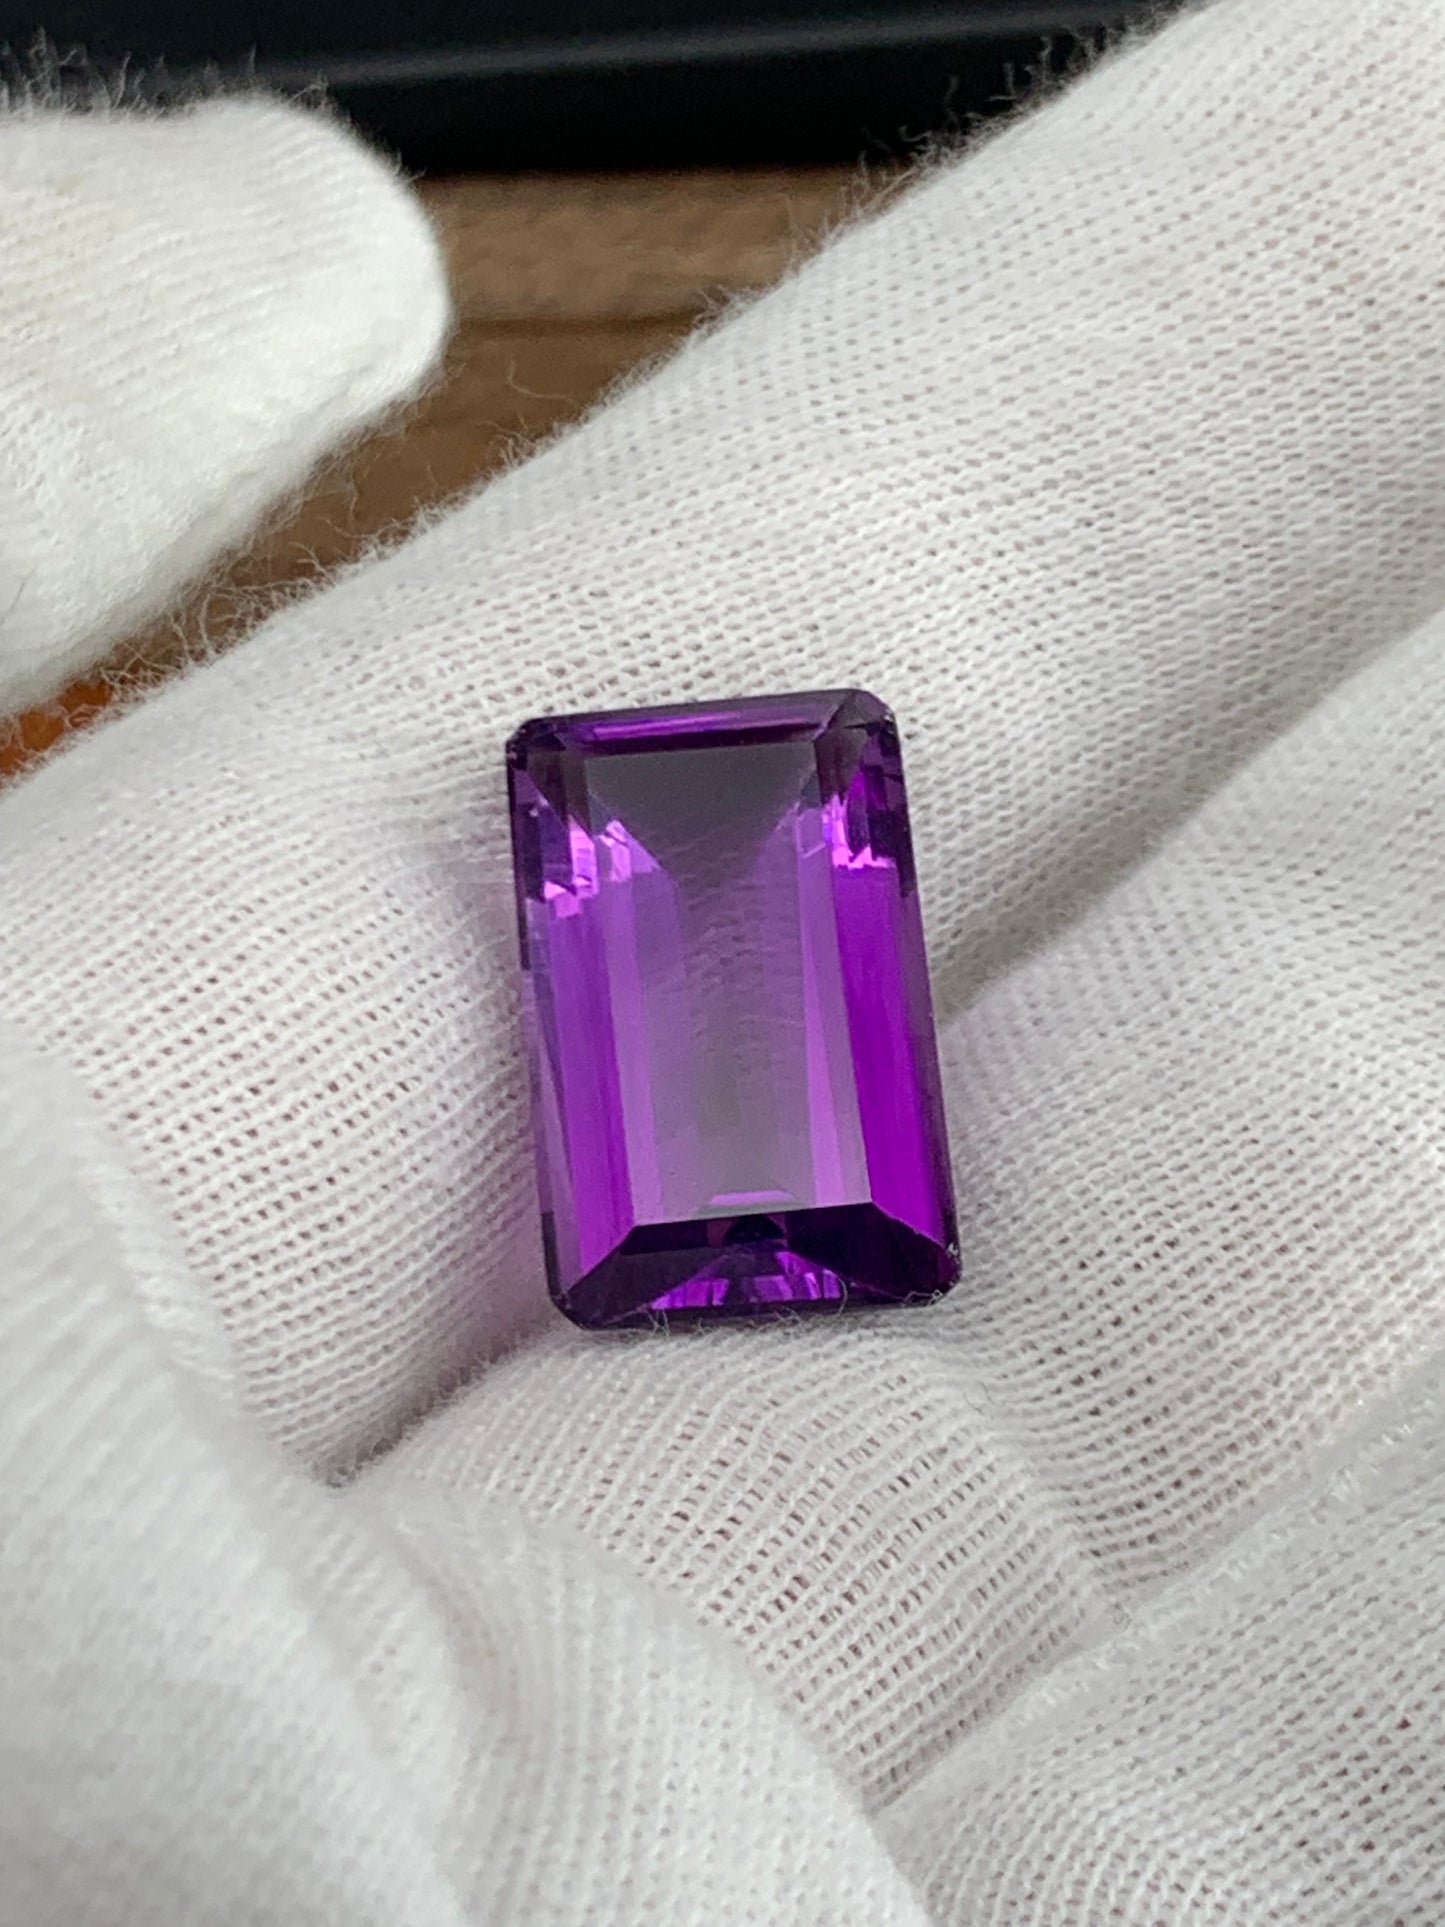 Natural Emerald Cut Amethyst Gemstone 14.32 Carat,  Purple Stone. Eye Clean Loose Stone for Necklace or Ring